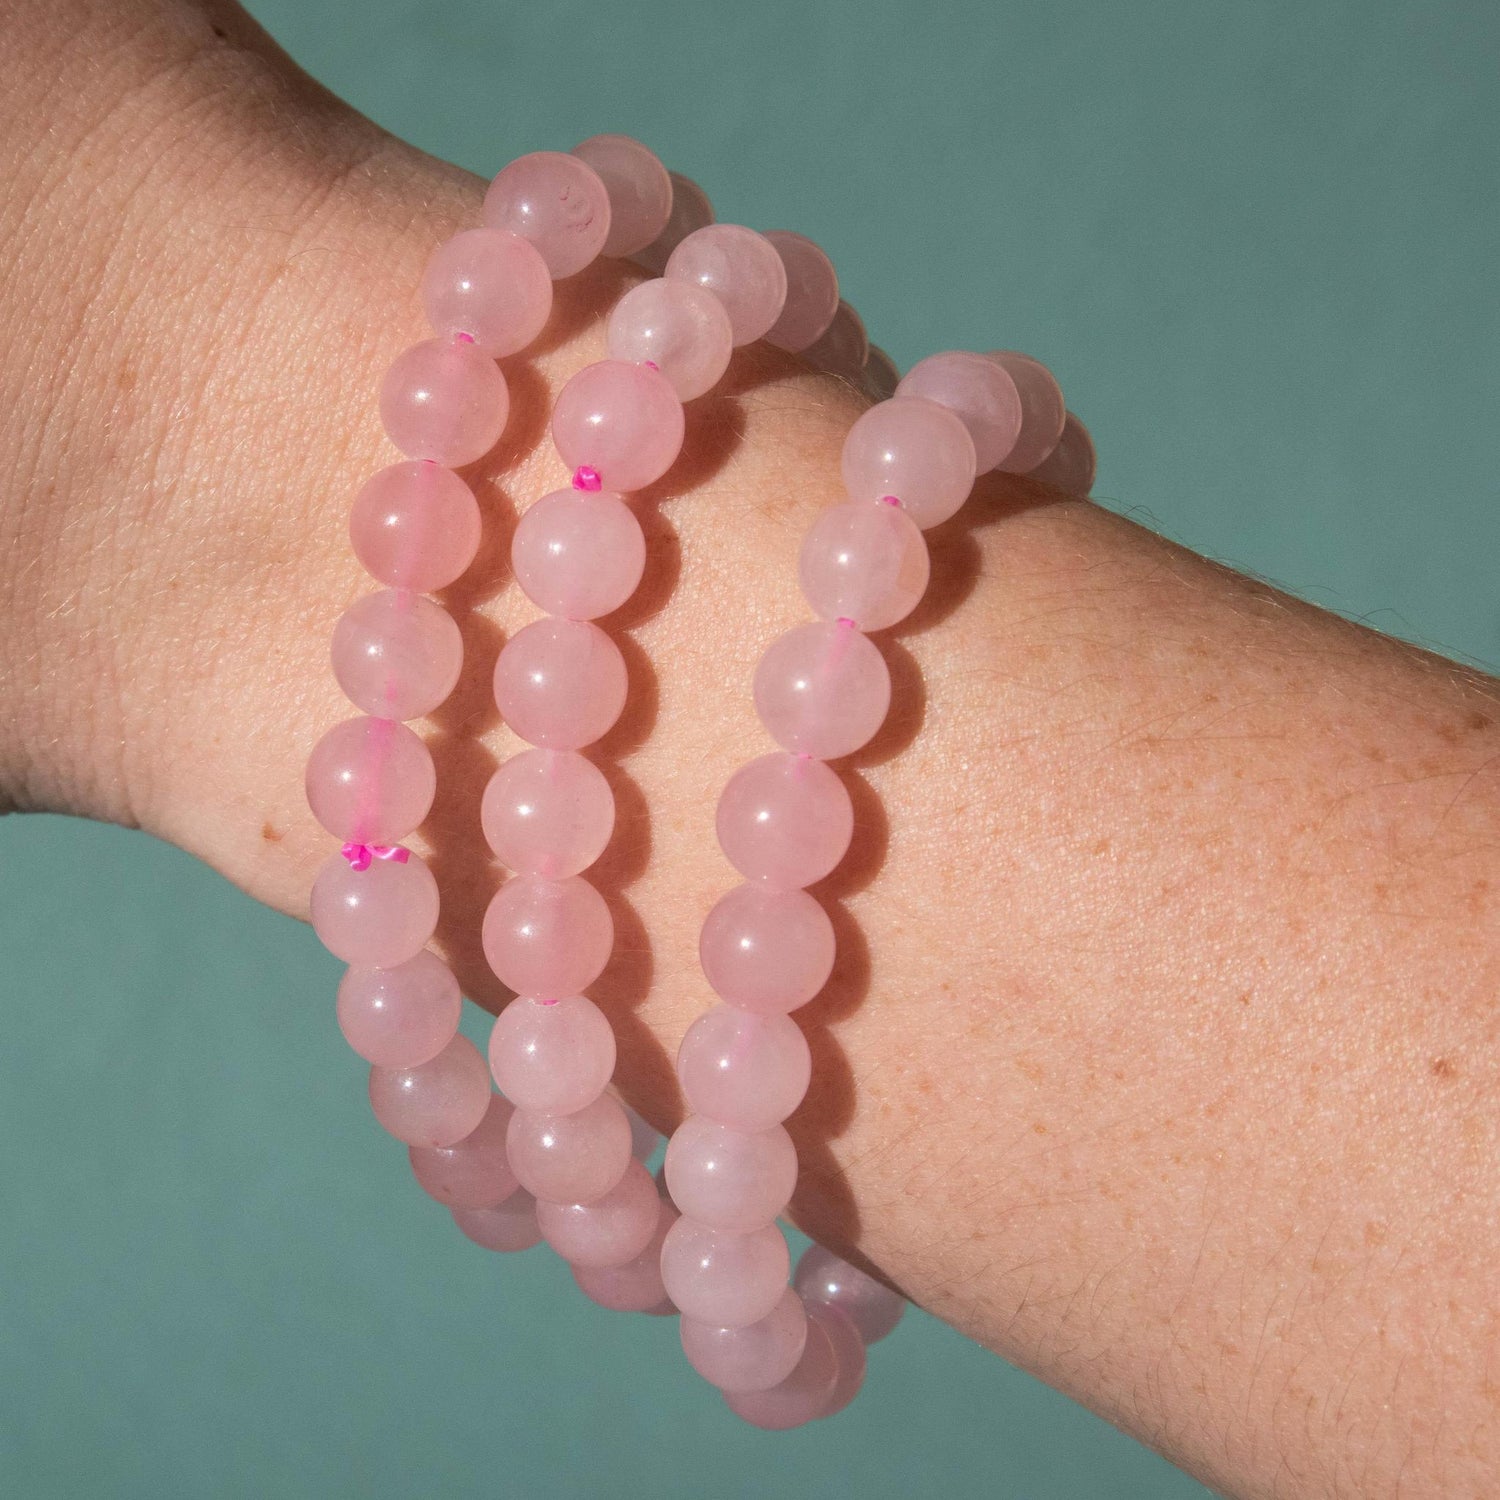 Rose Quartz - Everything You Need to Know Before You Buy | Jewelry Guide